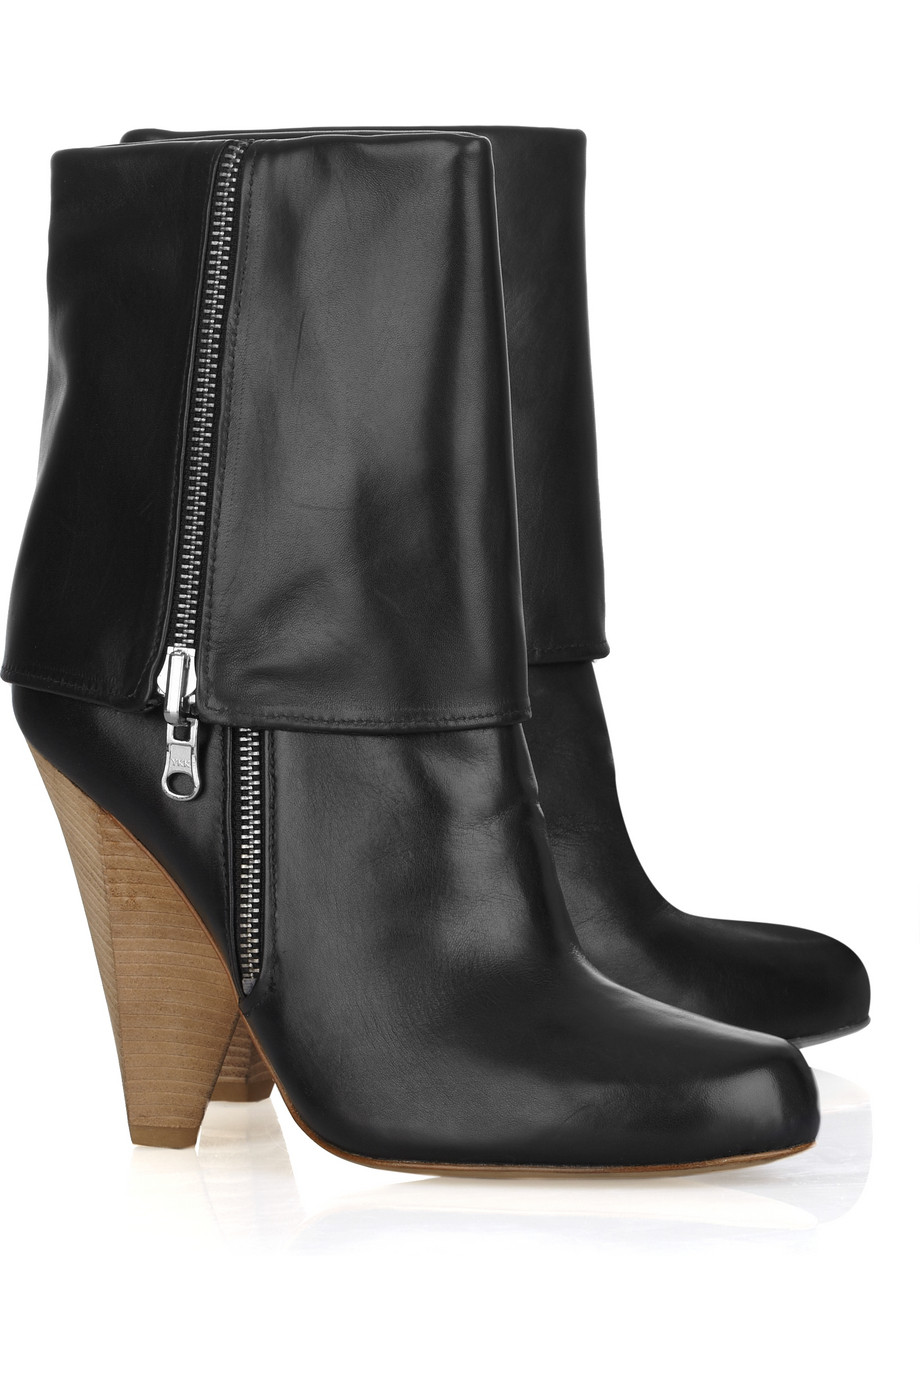 Lyst - Belle By Sigerson Morrison Fold-over Leather Boots in Black